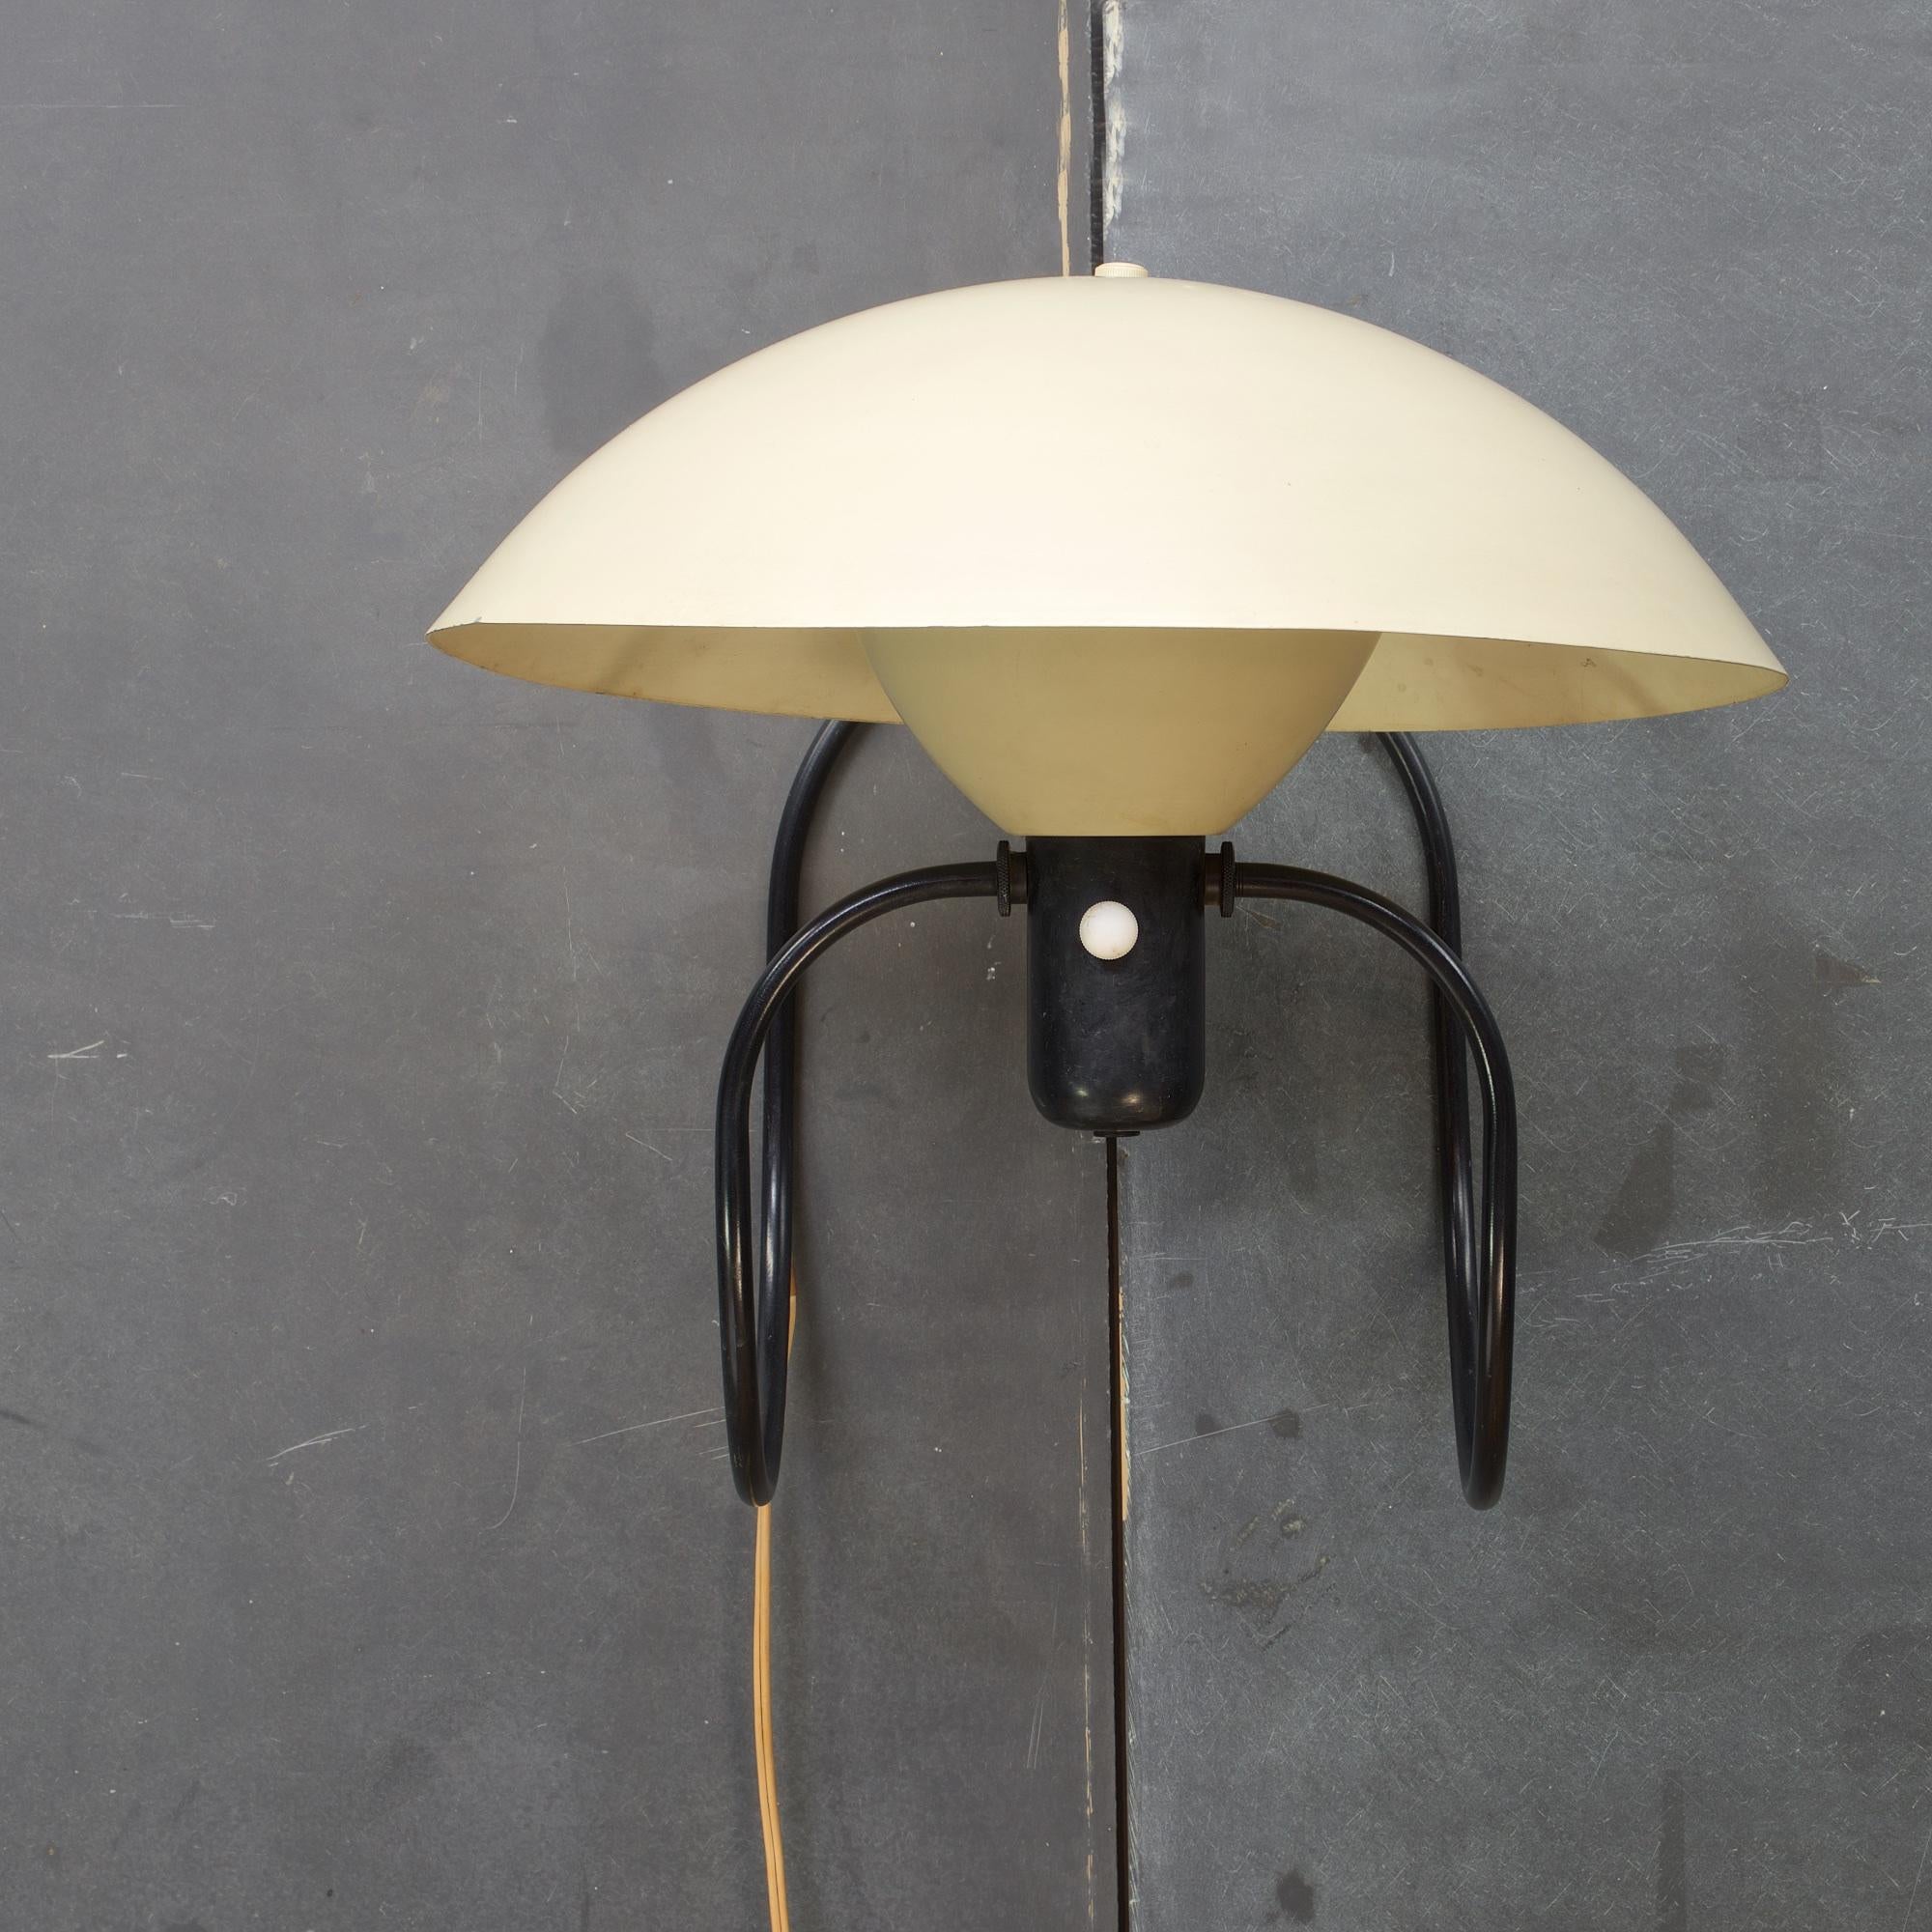 A wonderful and rare piece of postwar modernism, and the most famous design by Greta Von Nessen (1898-1975). The aluminum and enameled steel Anywhere Lamp, 1951. Though, 